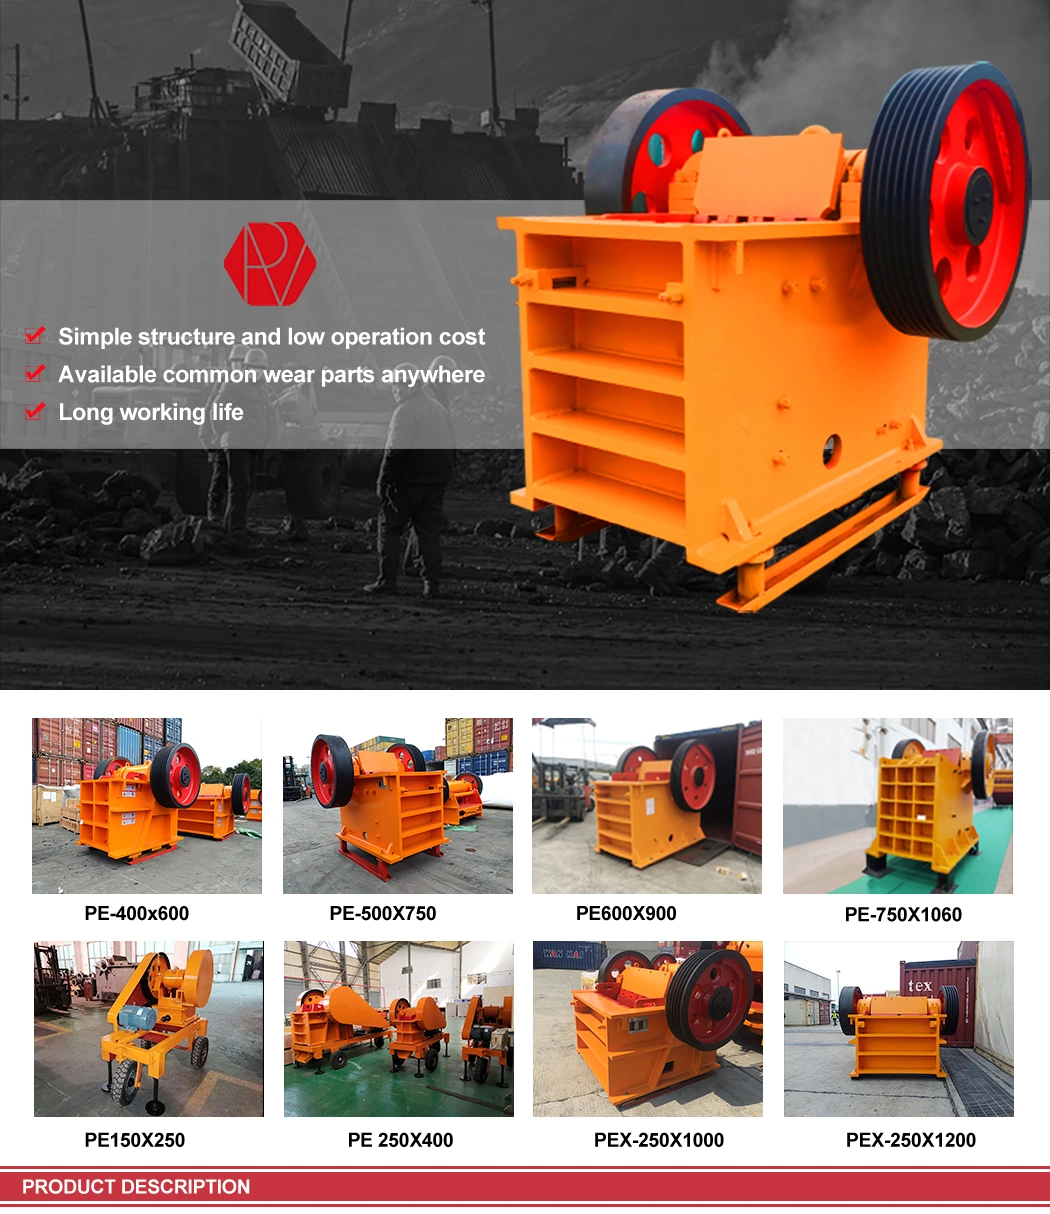 China Cheap Lab Jaw Crusher Manufacturers with Eccentric Shaft